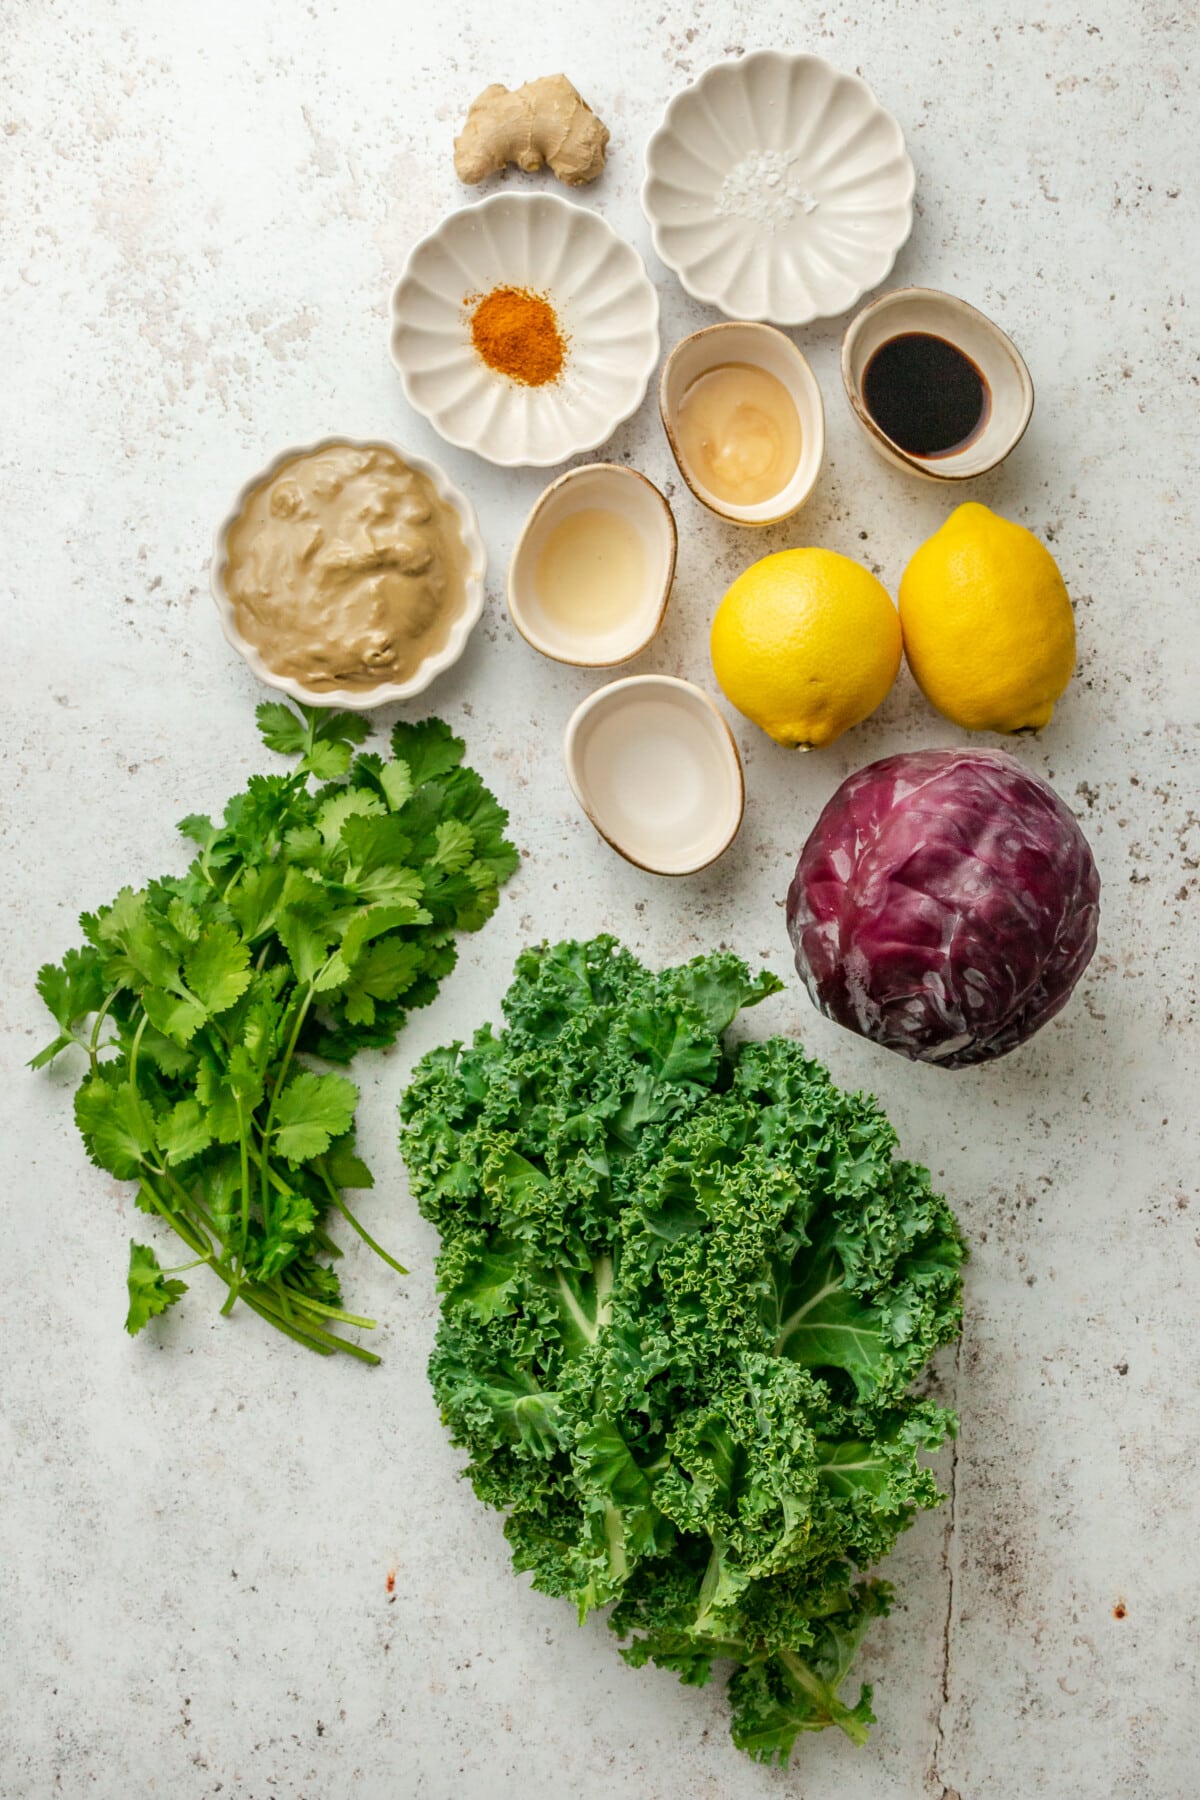 Ingredients for a big batch kale salad sit in a variety of bowls on a light grey surface.